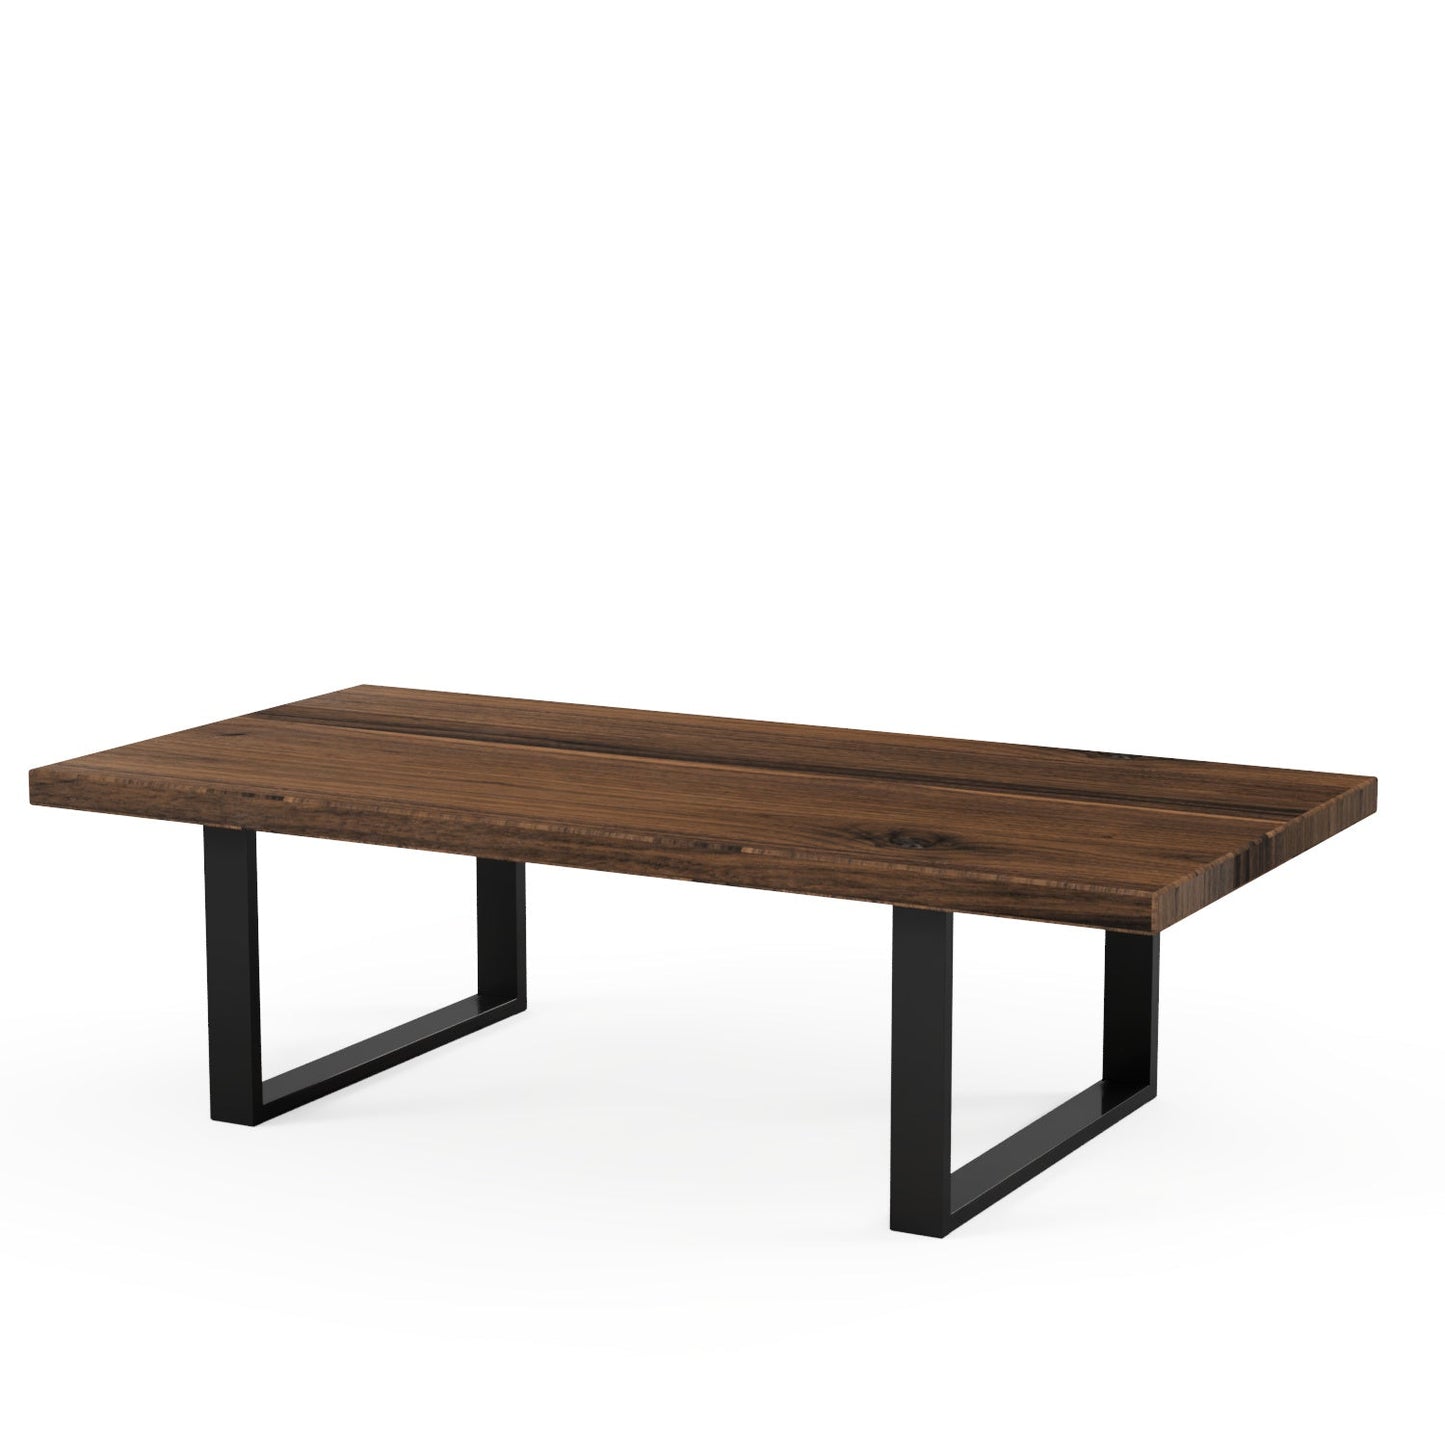 The Broadway Coffee Table - FargoWoodworks